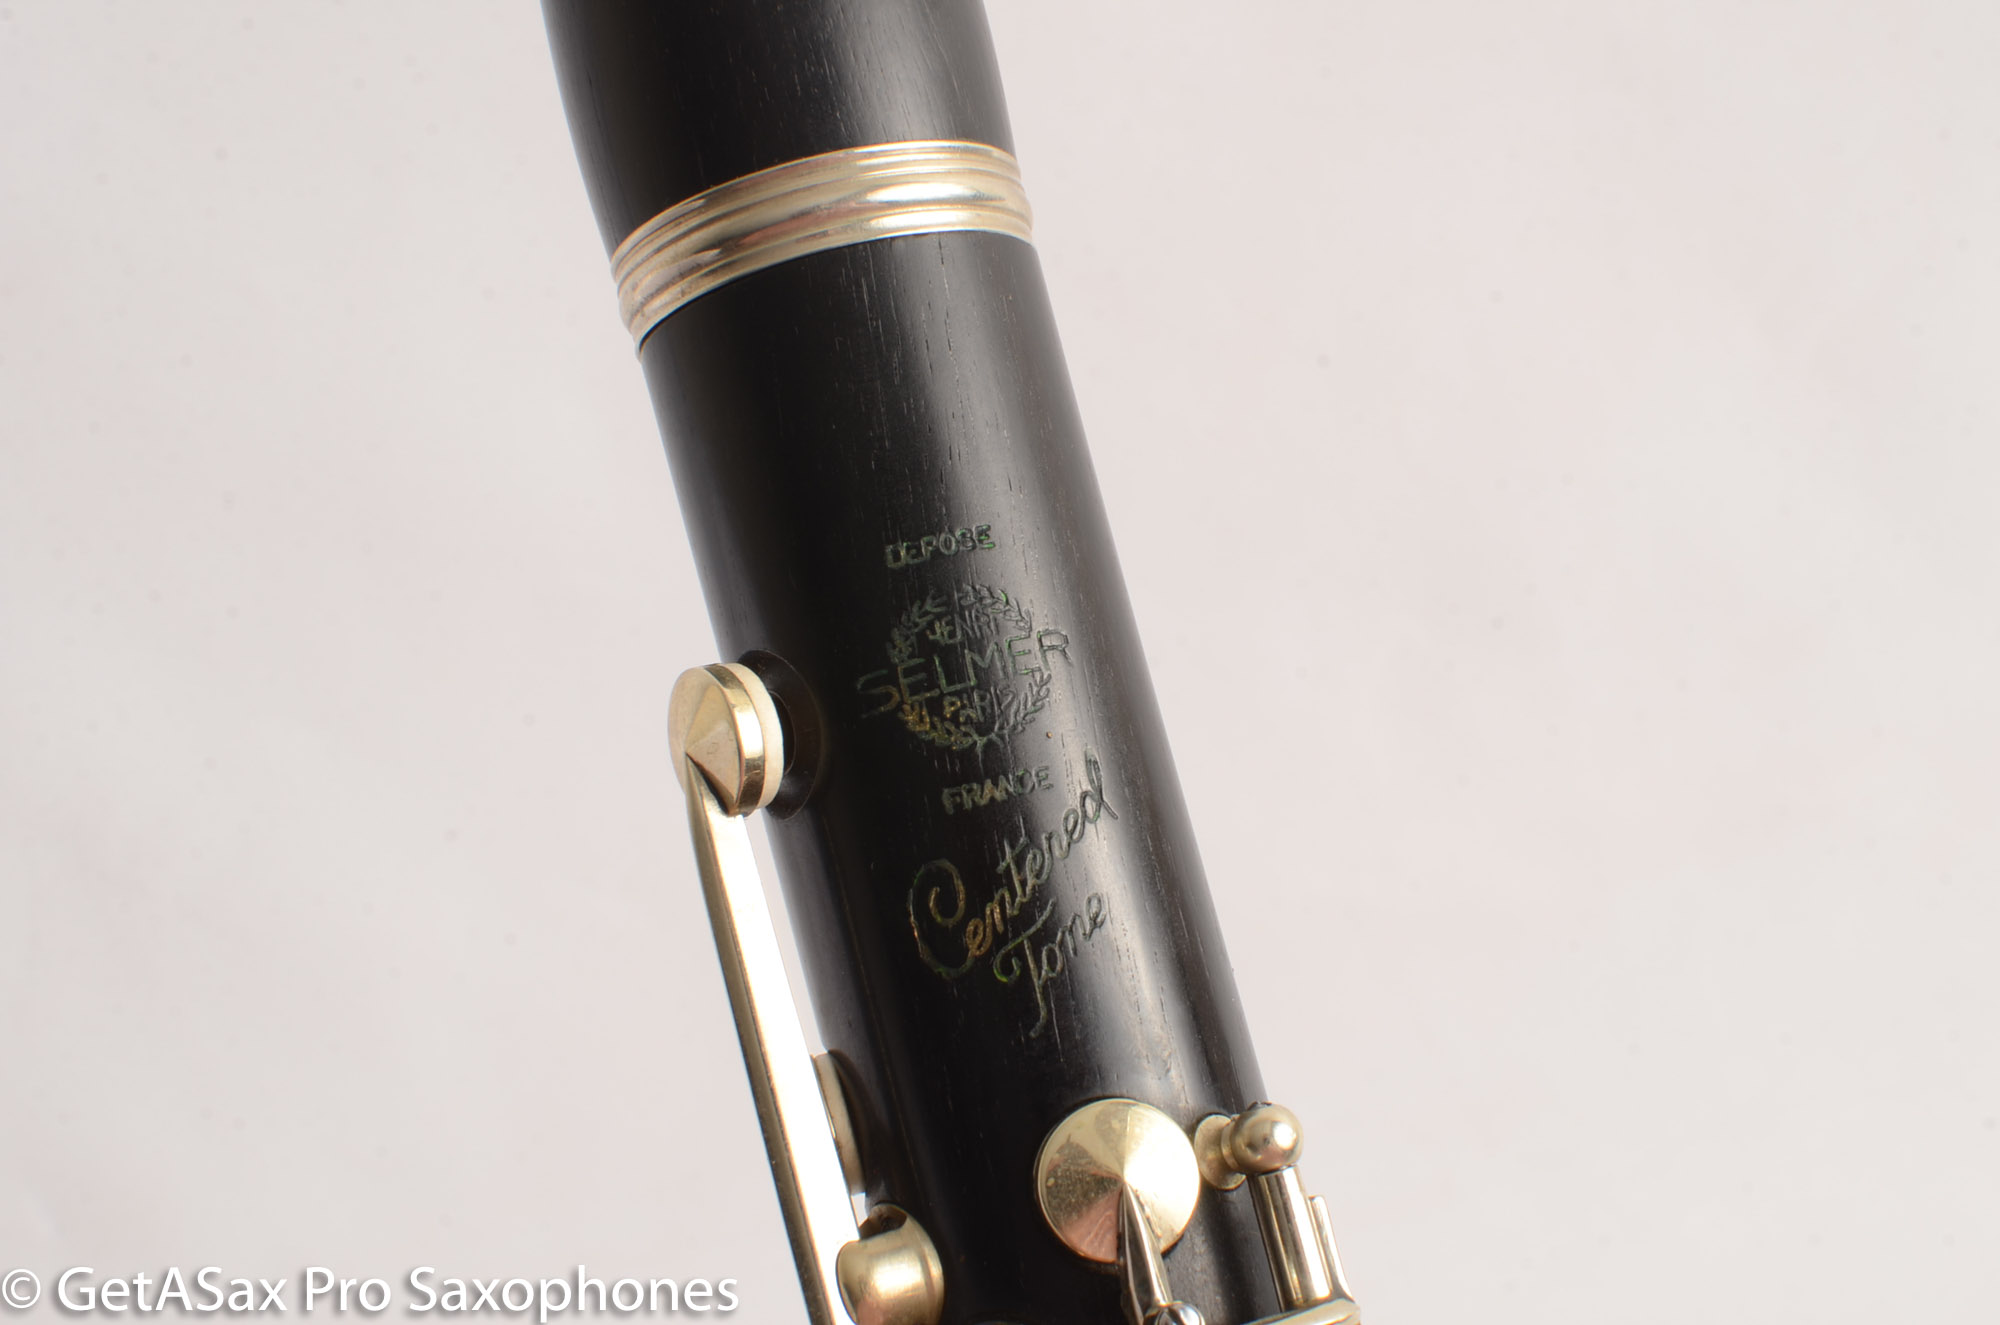 Selmer Centered-Tone Clarinet Great Condition! No cracks or repairs ...